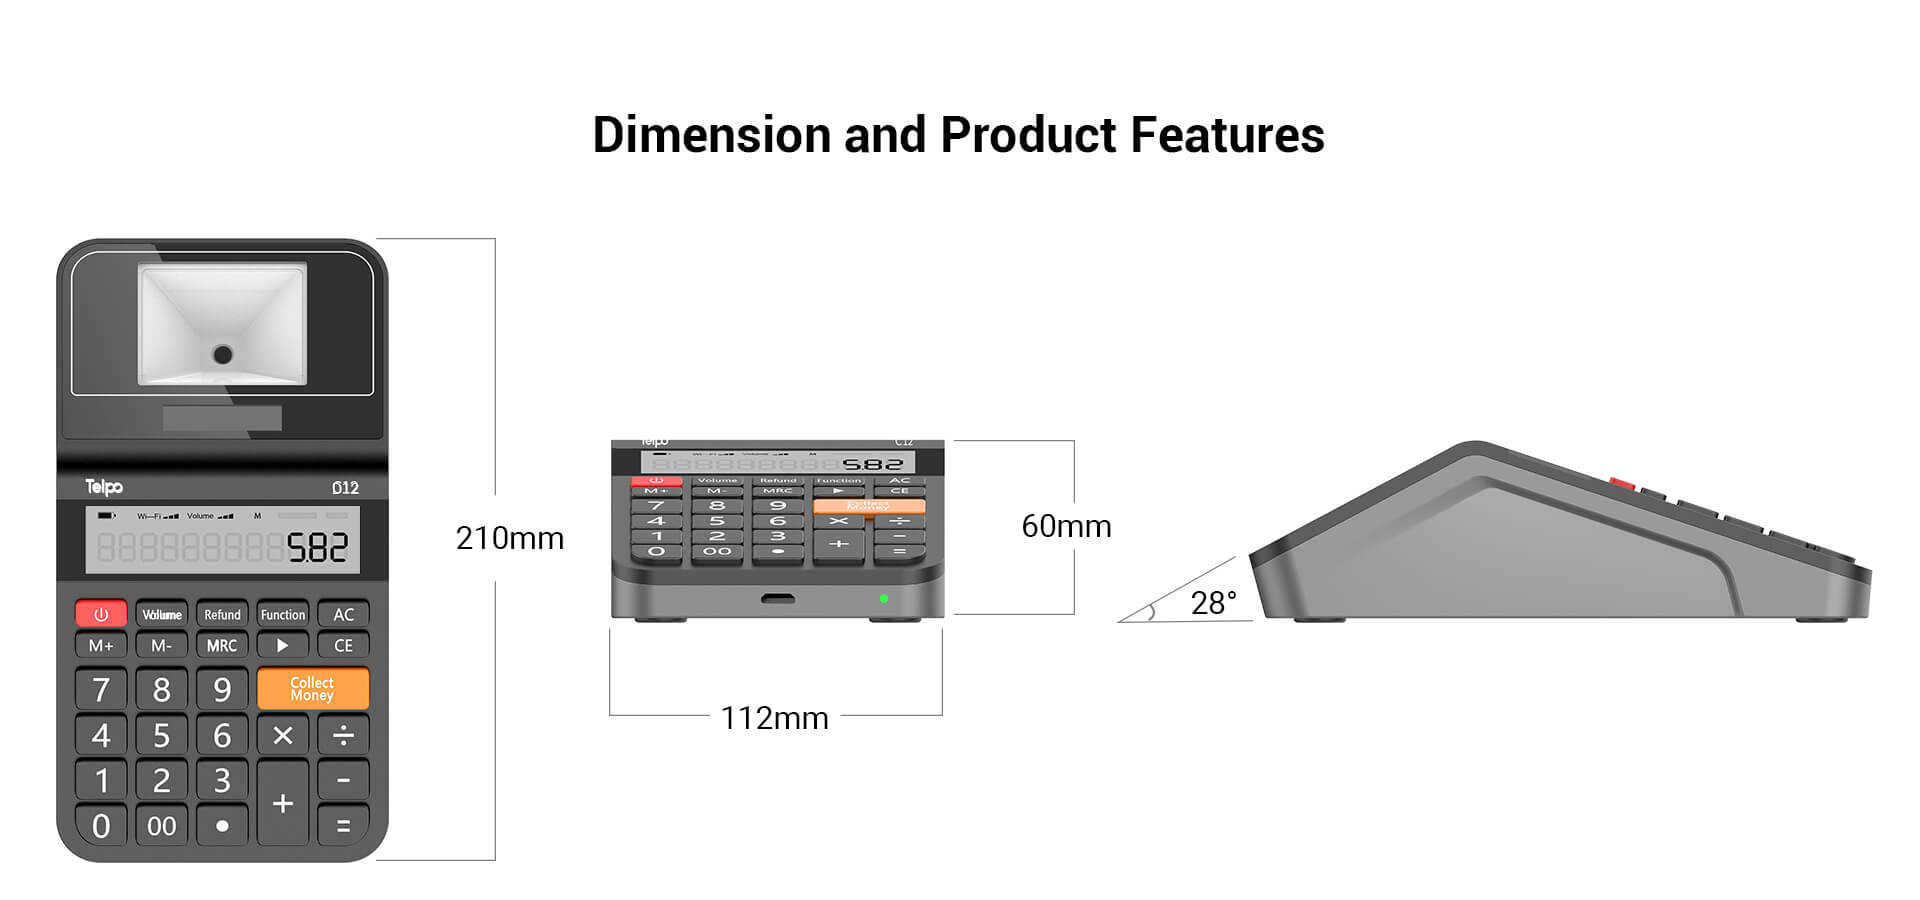 Dimension and Product Features 